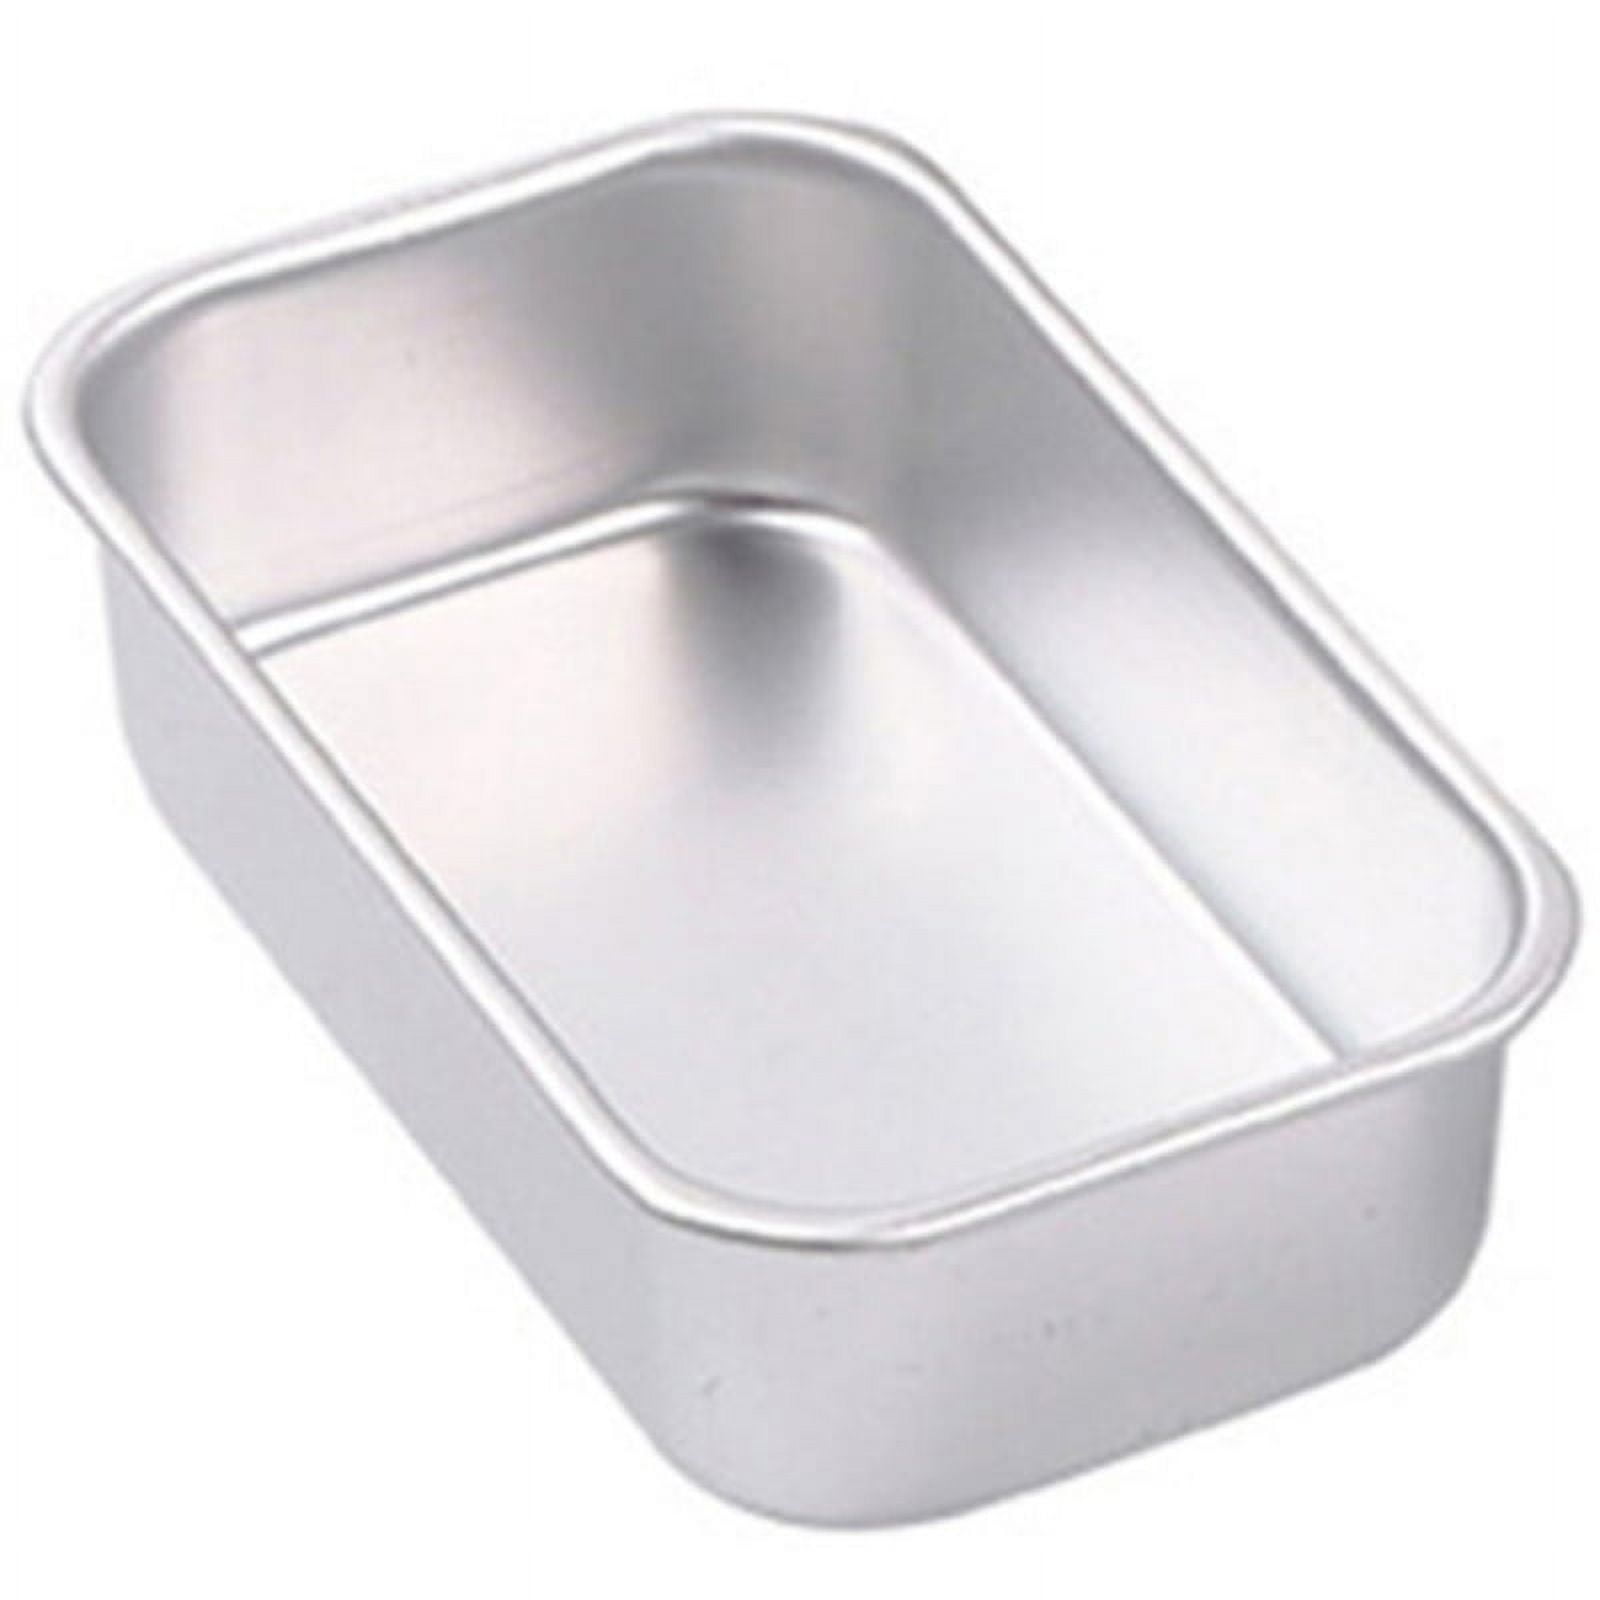  Loaf Pan Large 8x4.5 Stainless Steel Stainless Steel - Hand  Made In USA - Not Polished Food Service Grade: Home & Kitchen